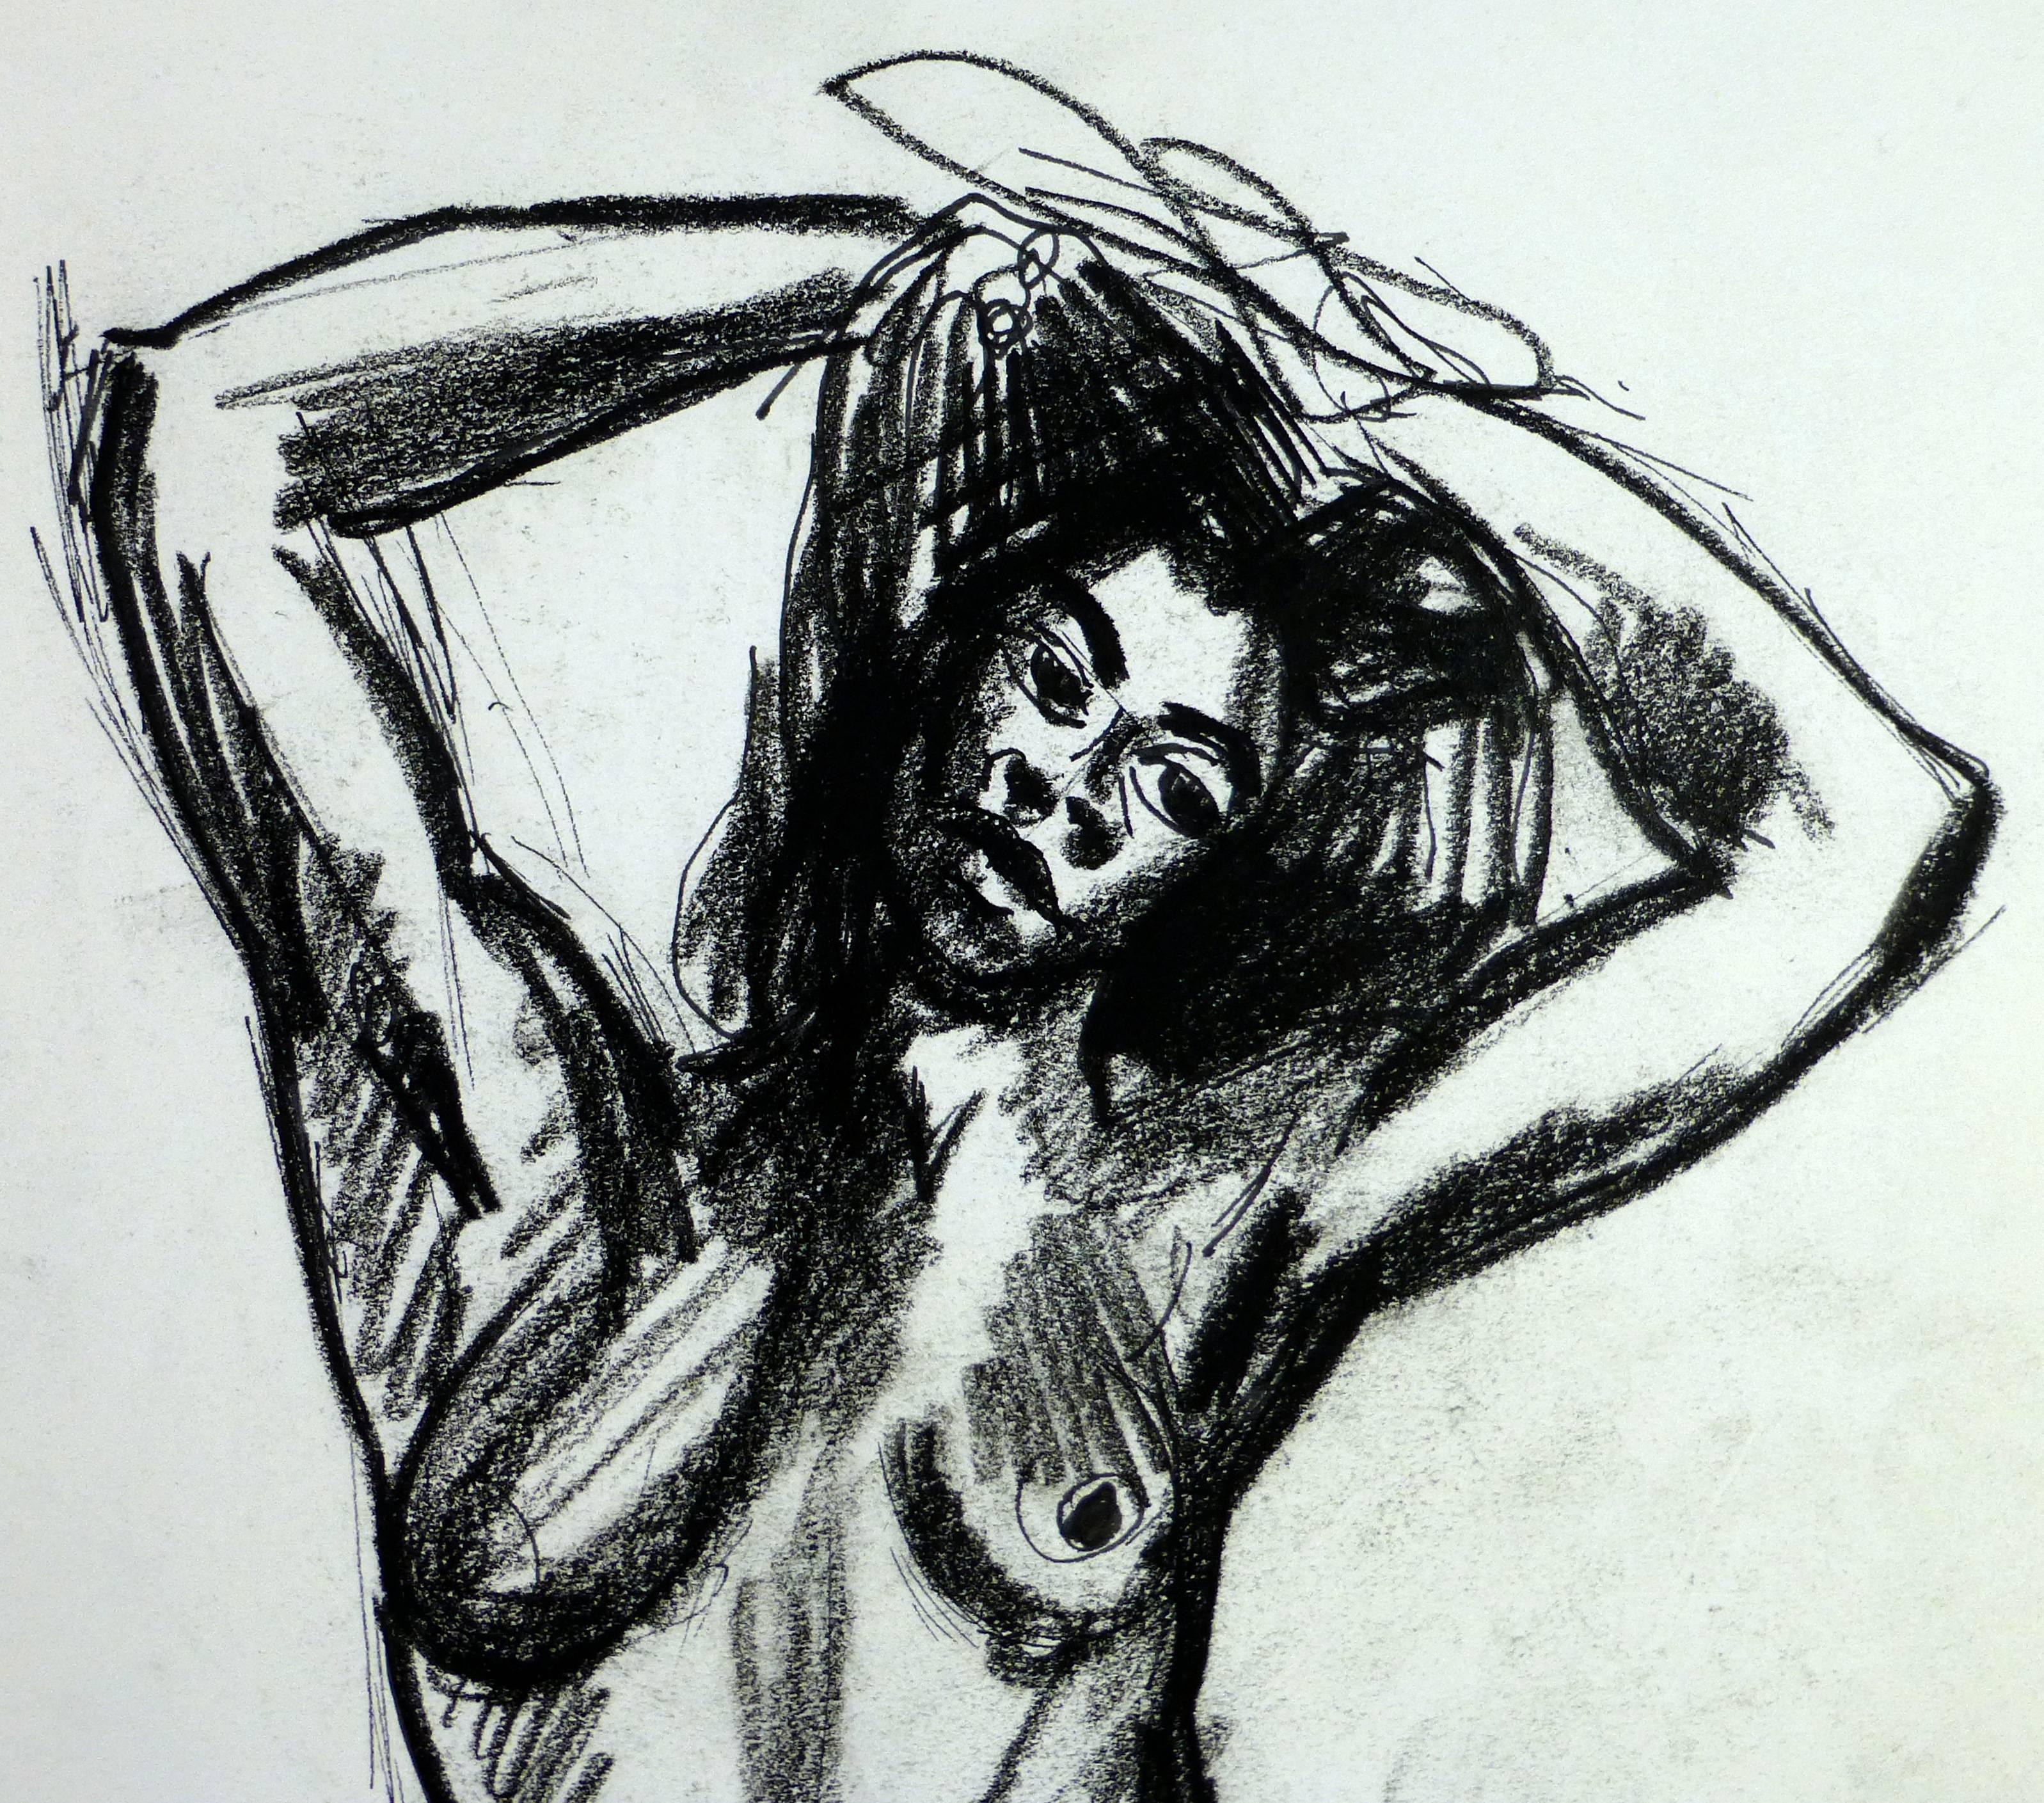 Charcoal sketch of nude female with hands behind her head, circa 1990.  

Original artwork on paper displayed on a white mat with a gold border. Archival plastic sleeve and Certificate of Authenticity included. Artwork, 13.75